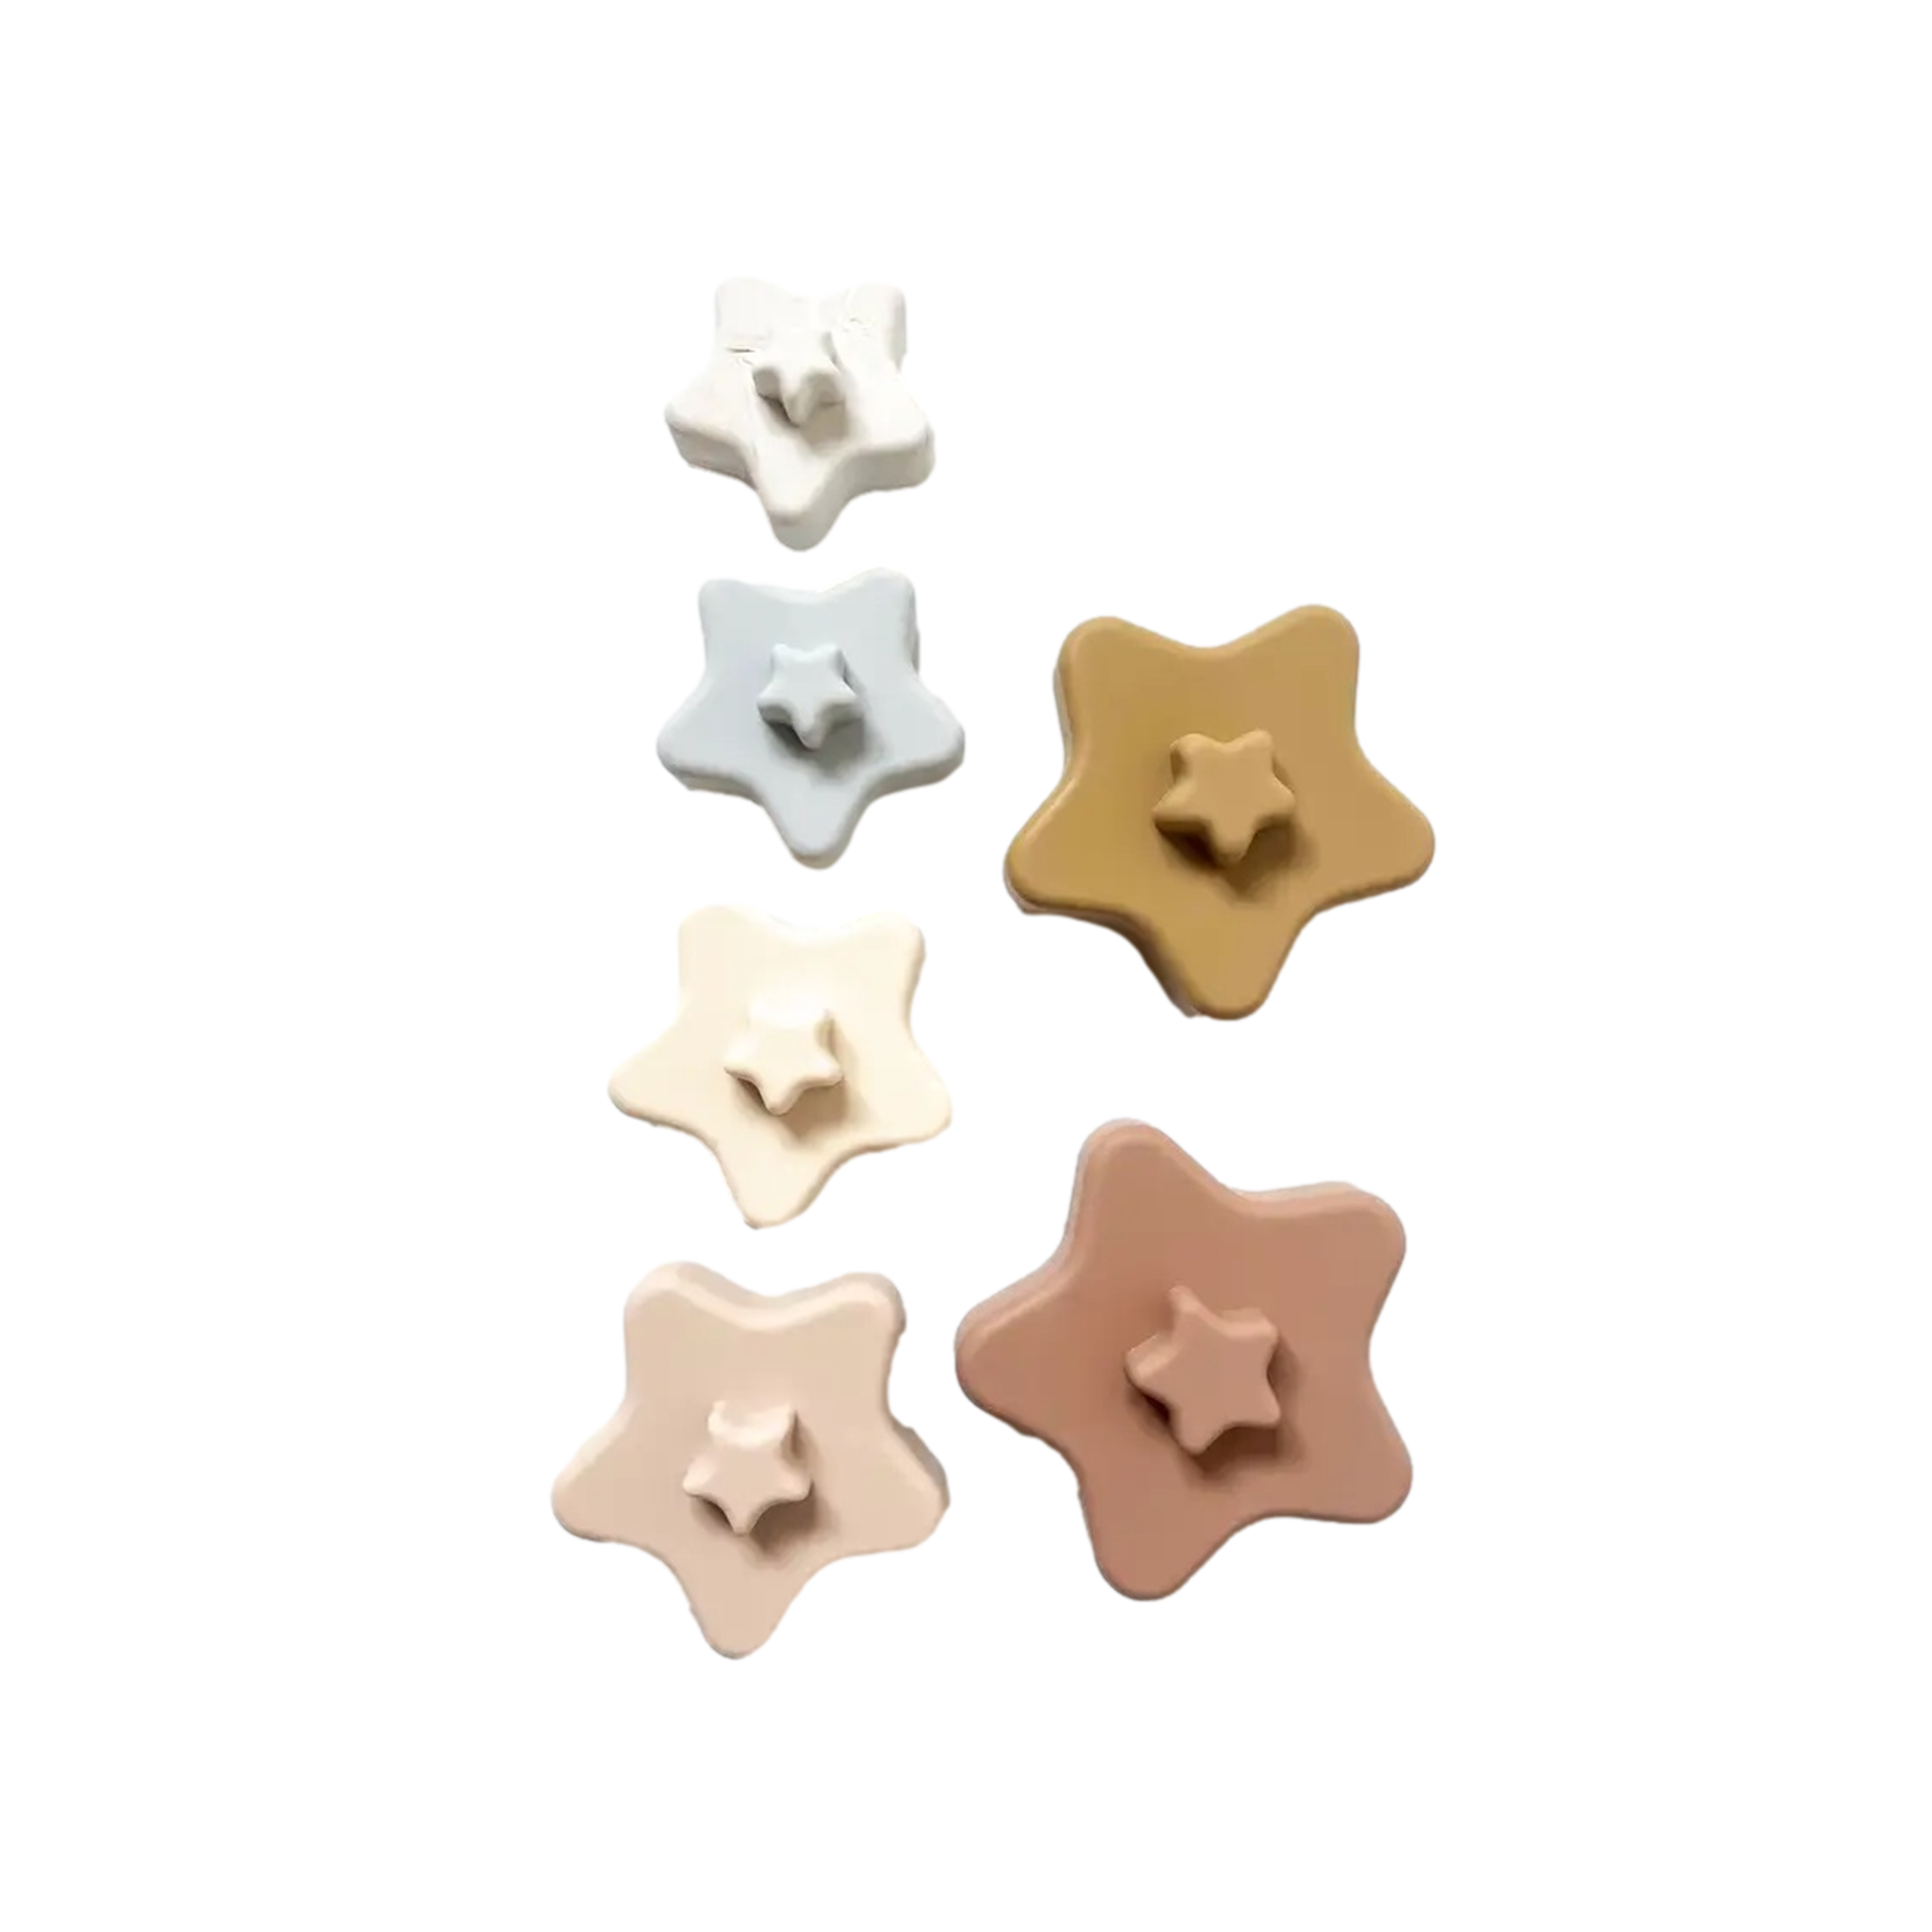 Silicone Star Stacking Toy